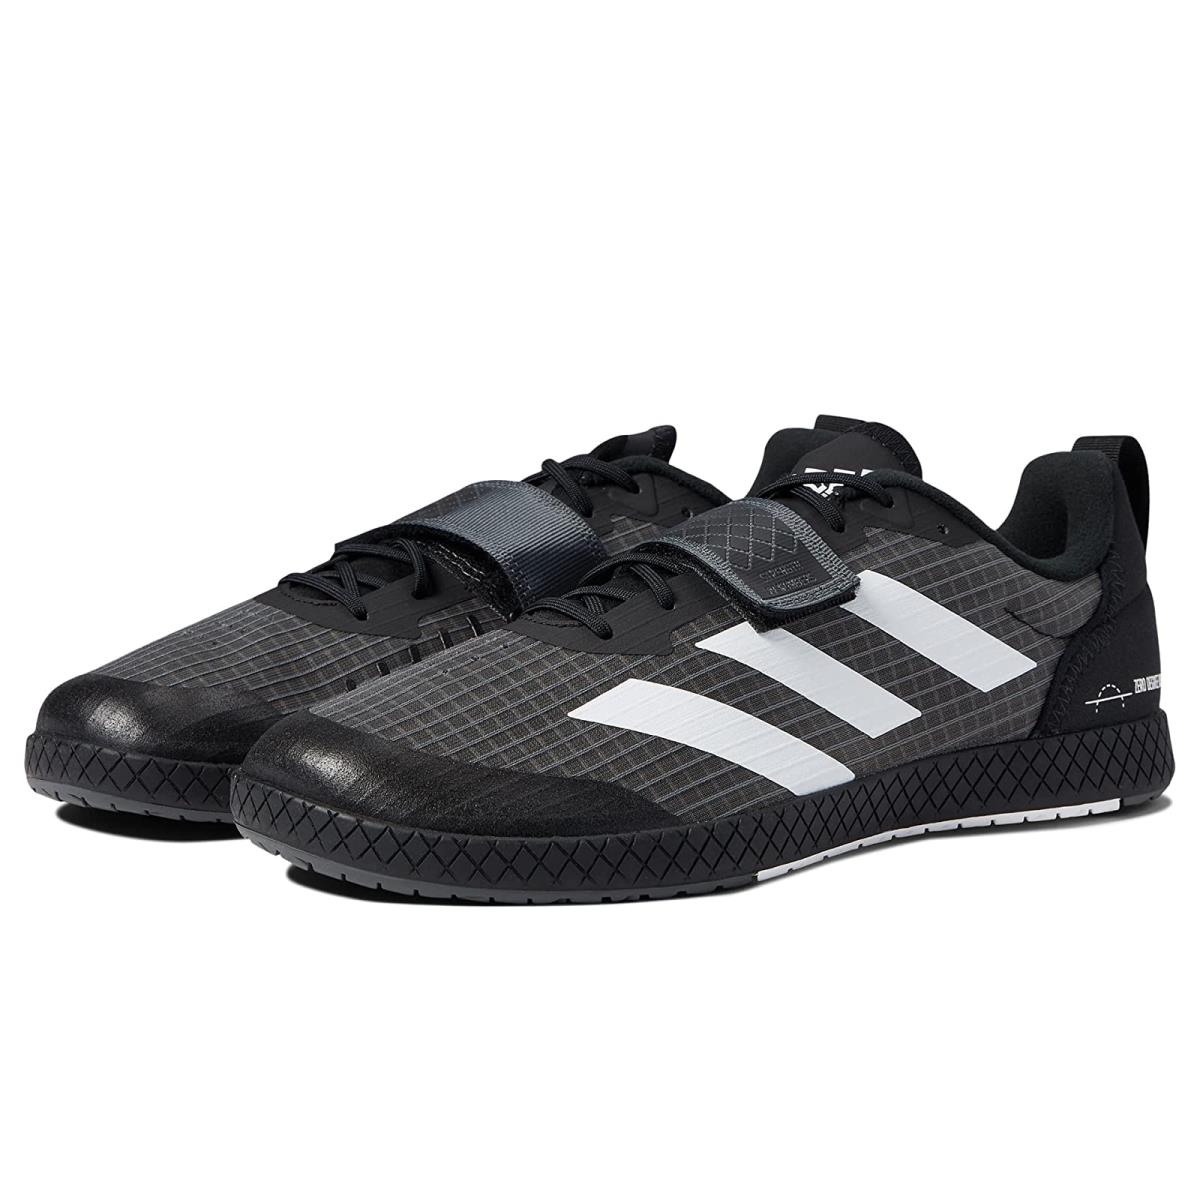 Unisex Sneakers Athletic Shoes Adidas The Total Black/White/Grey